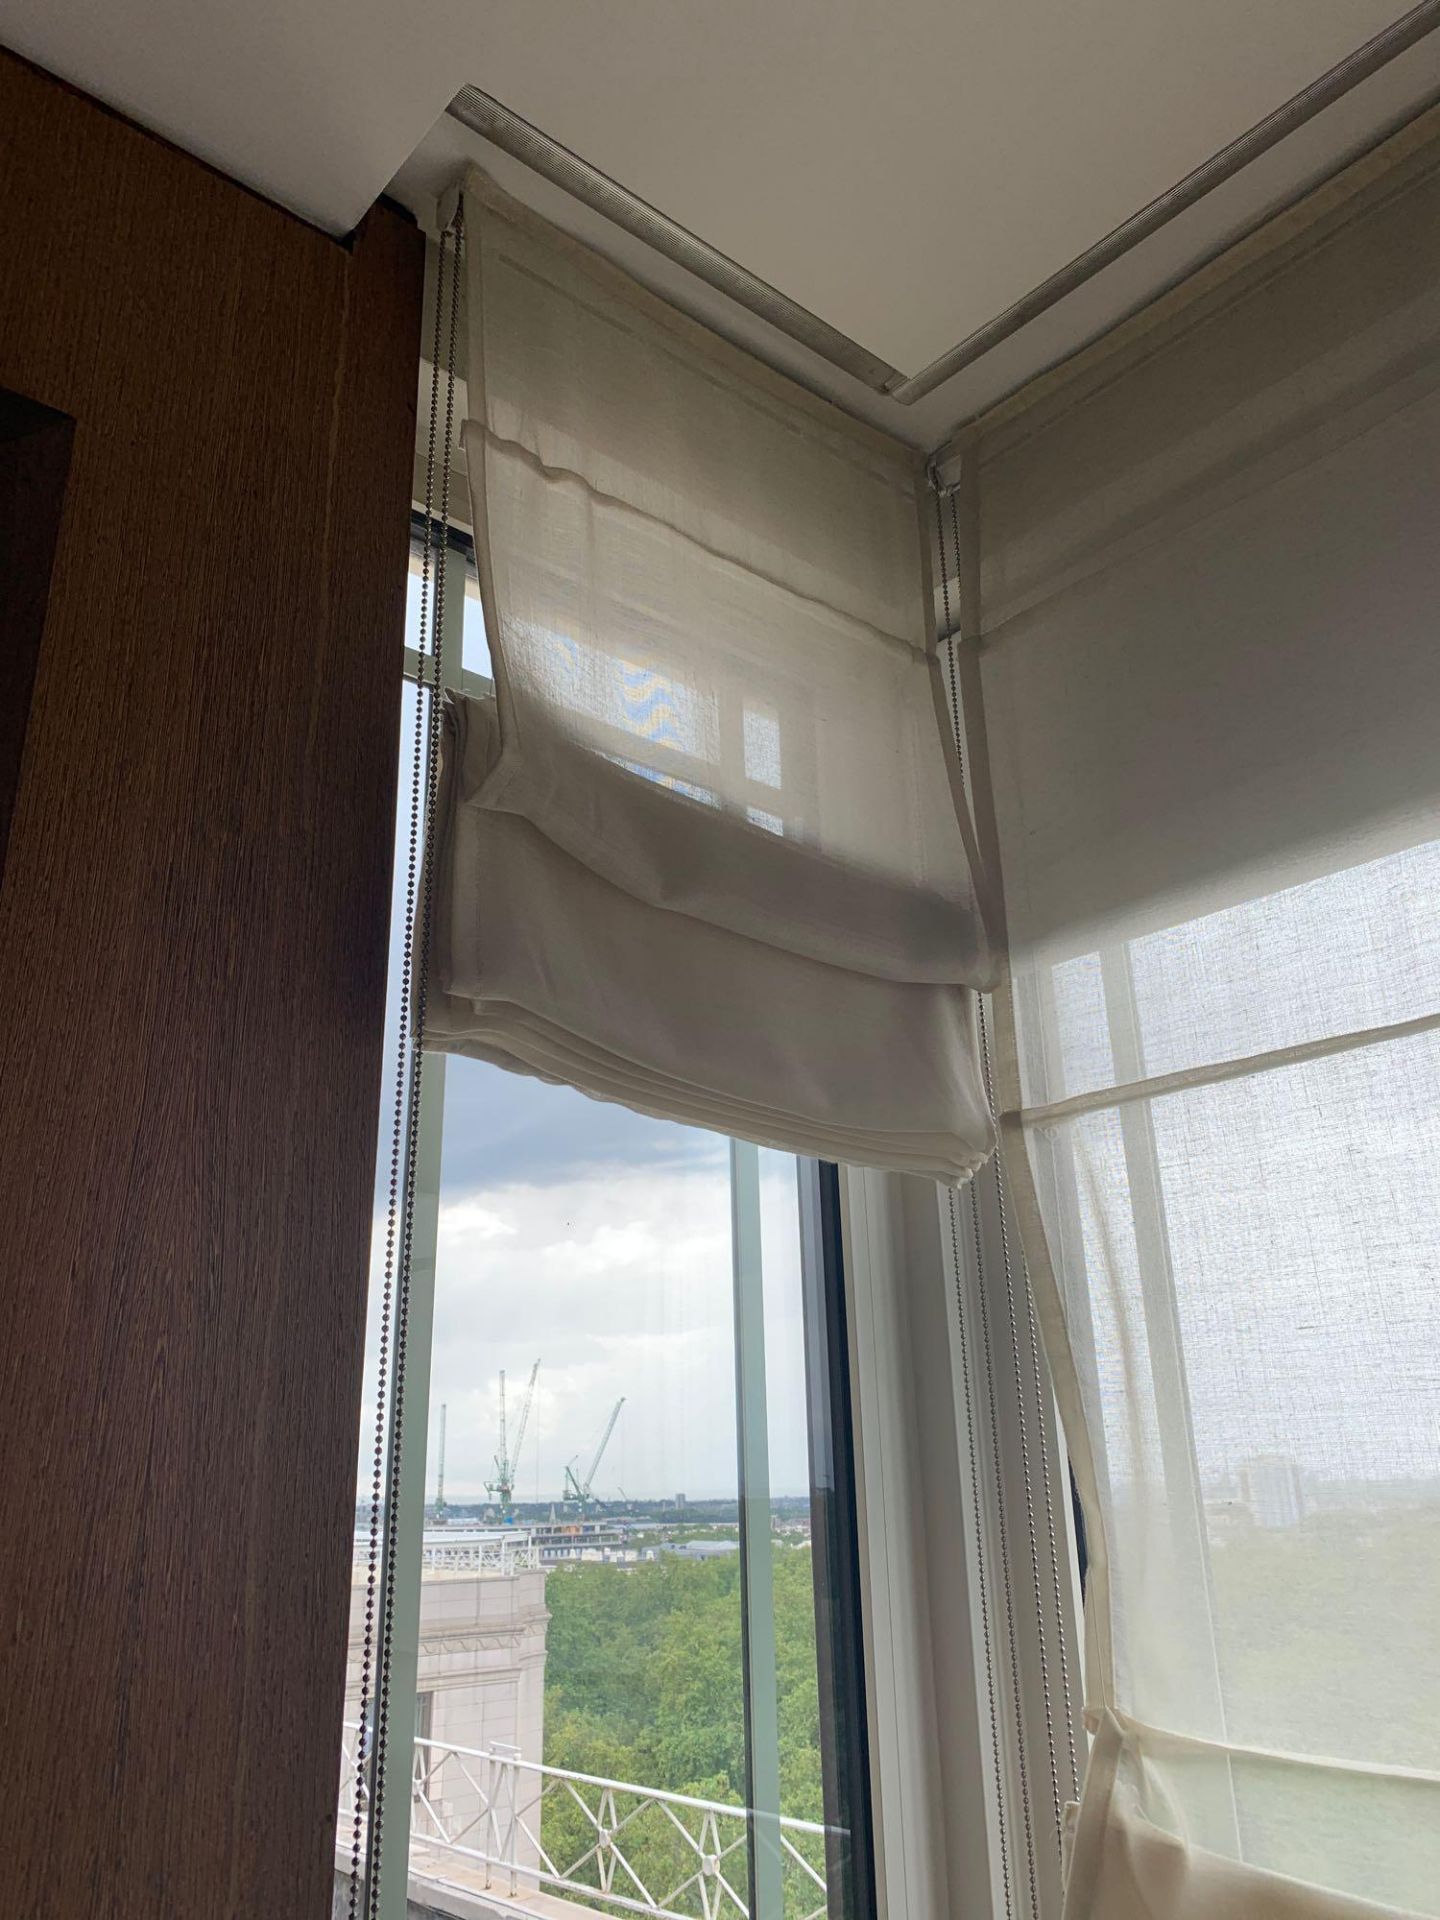 A Set Of 4 Cream Blinds In Tiered Fabric Dimensions Of 2 Side/Smaller Blinds: 54 x 30 Drop - Image 2 of 4